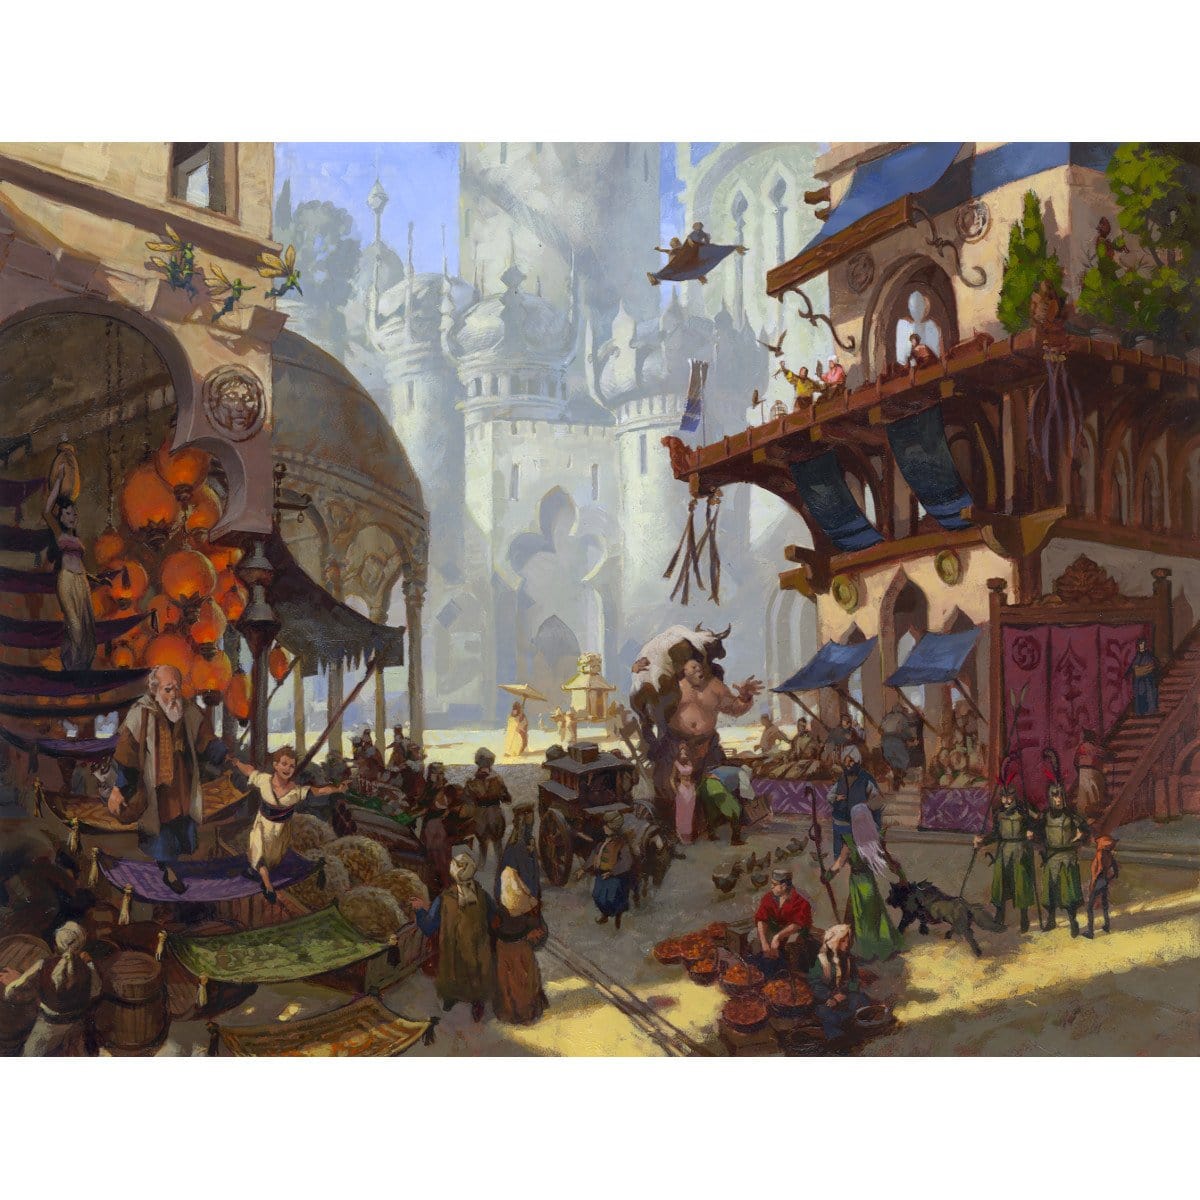 Bazaar of Baghdad Print - Print - Original Magic Art - Accessories for Magic the Gathering and other card games